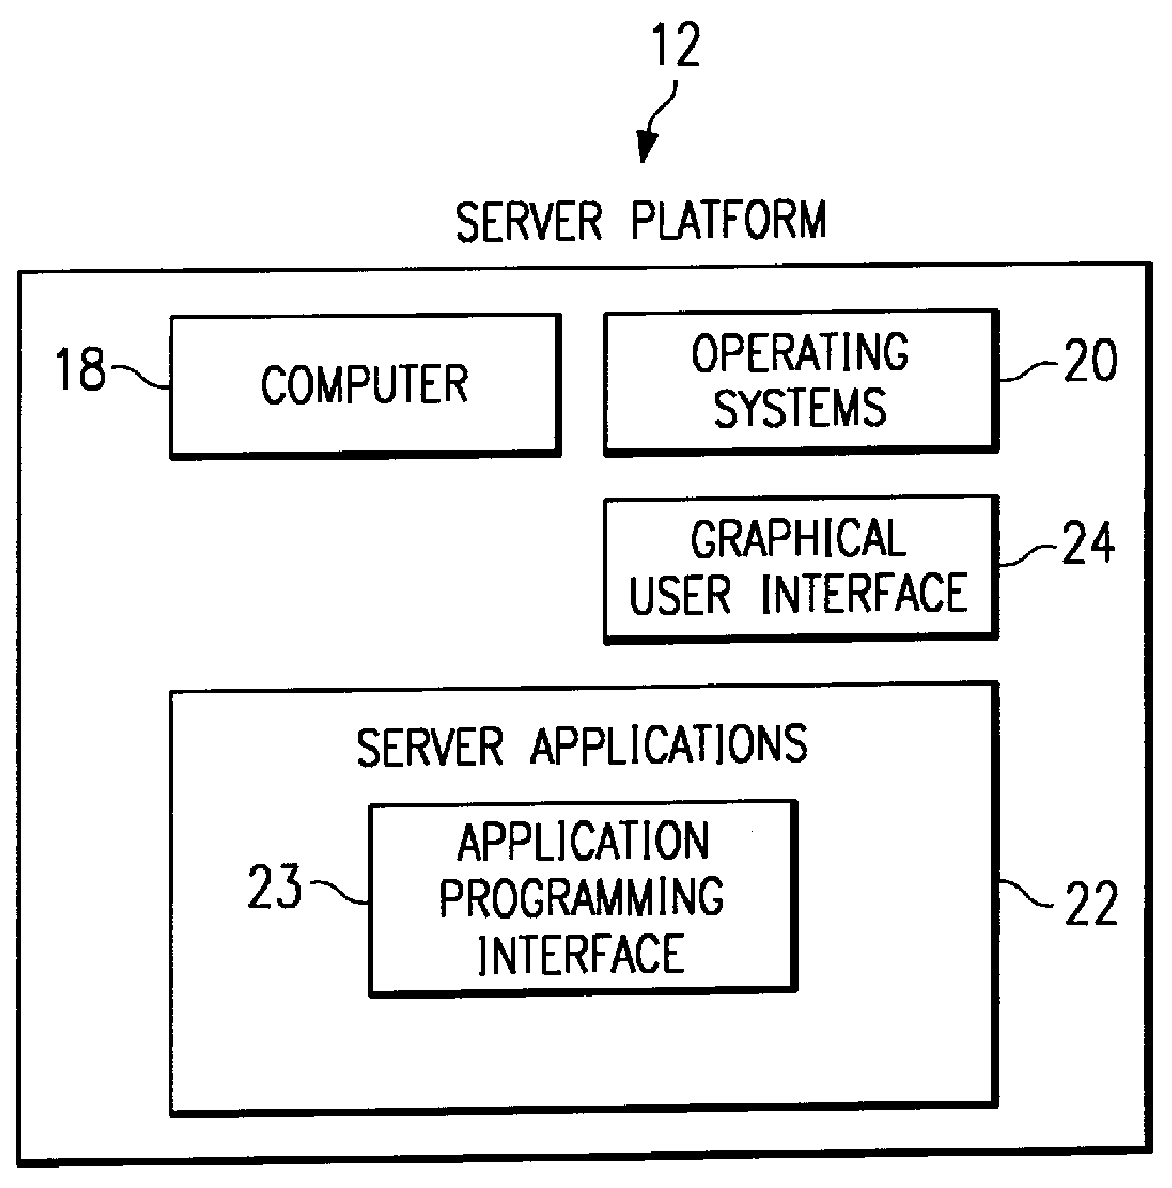 Method of saving a web page to a local hard drive to enable client-side browsing